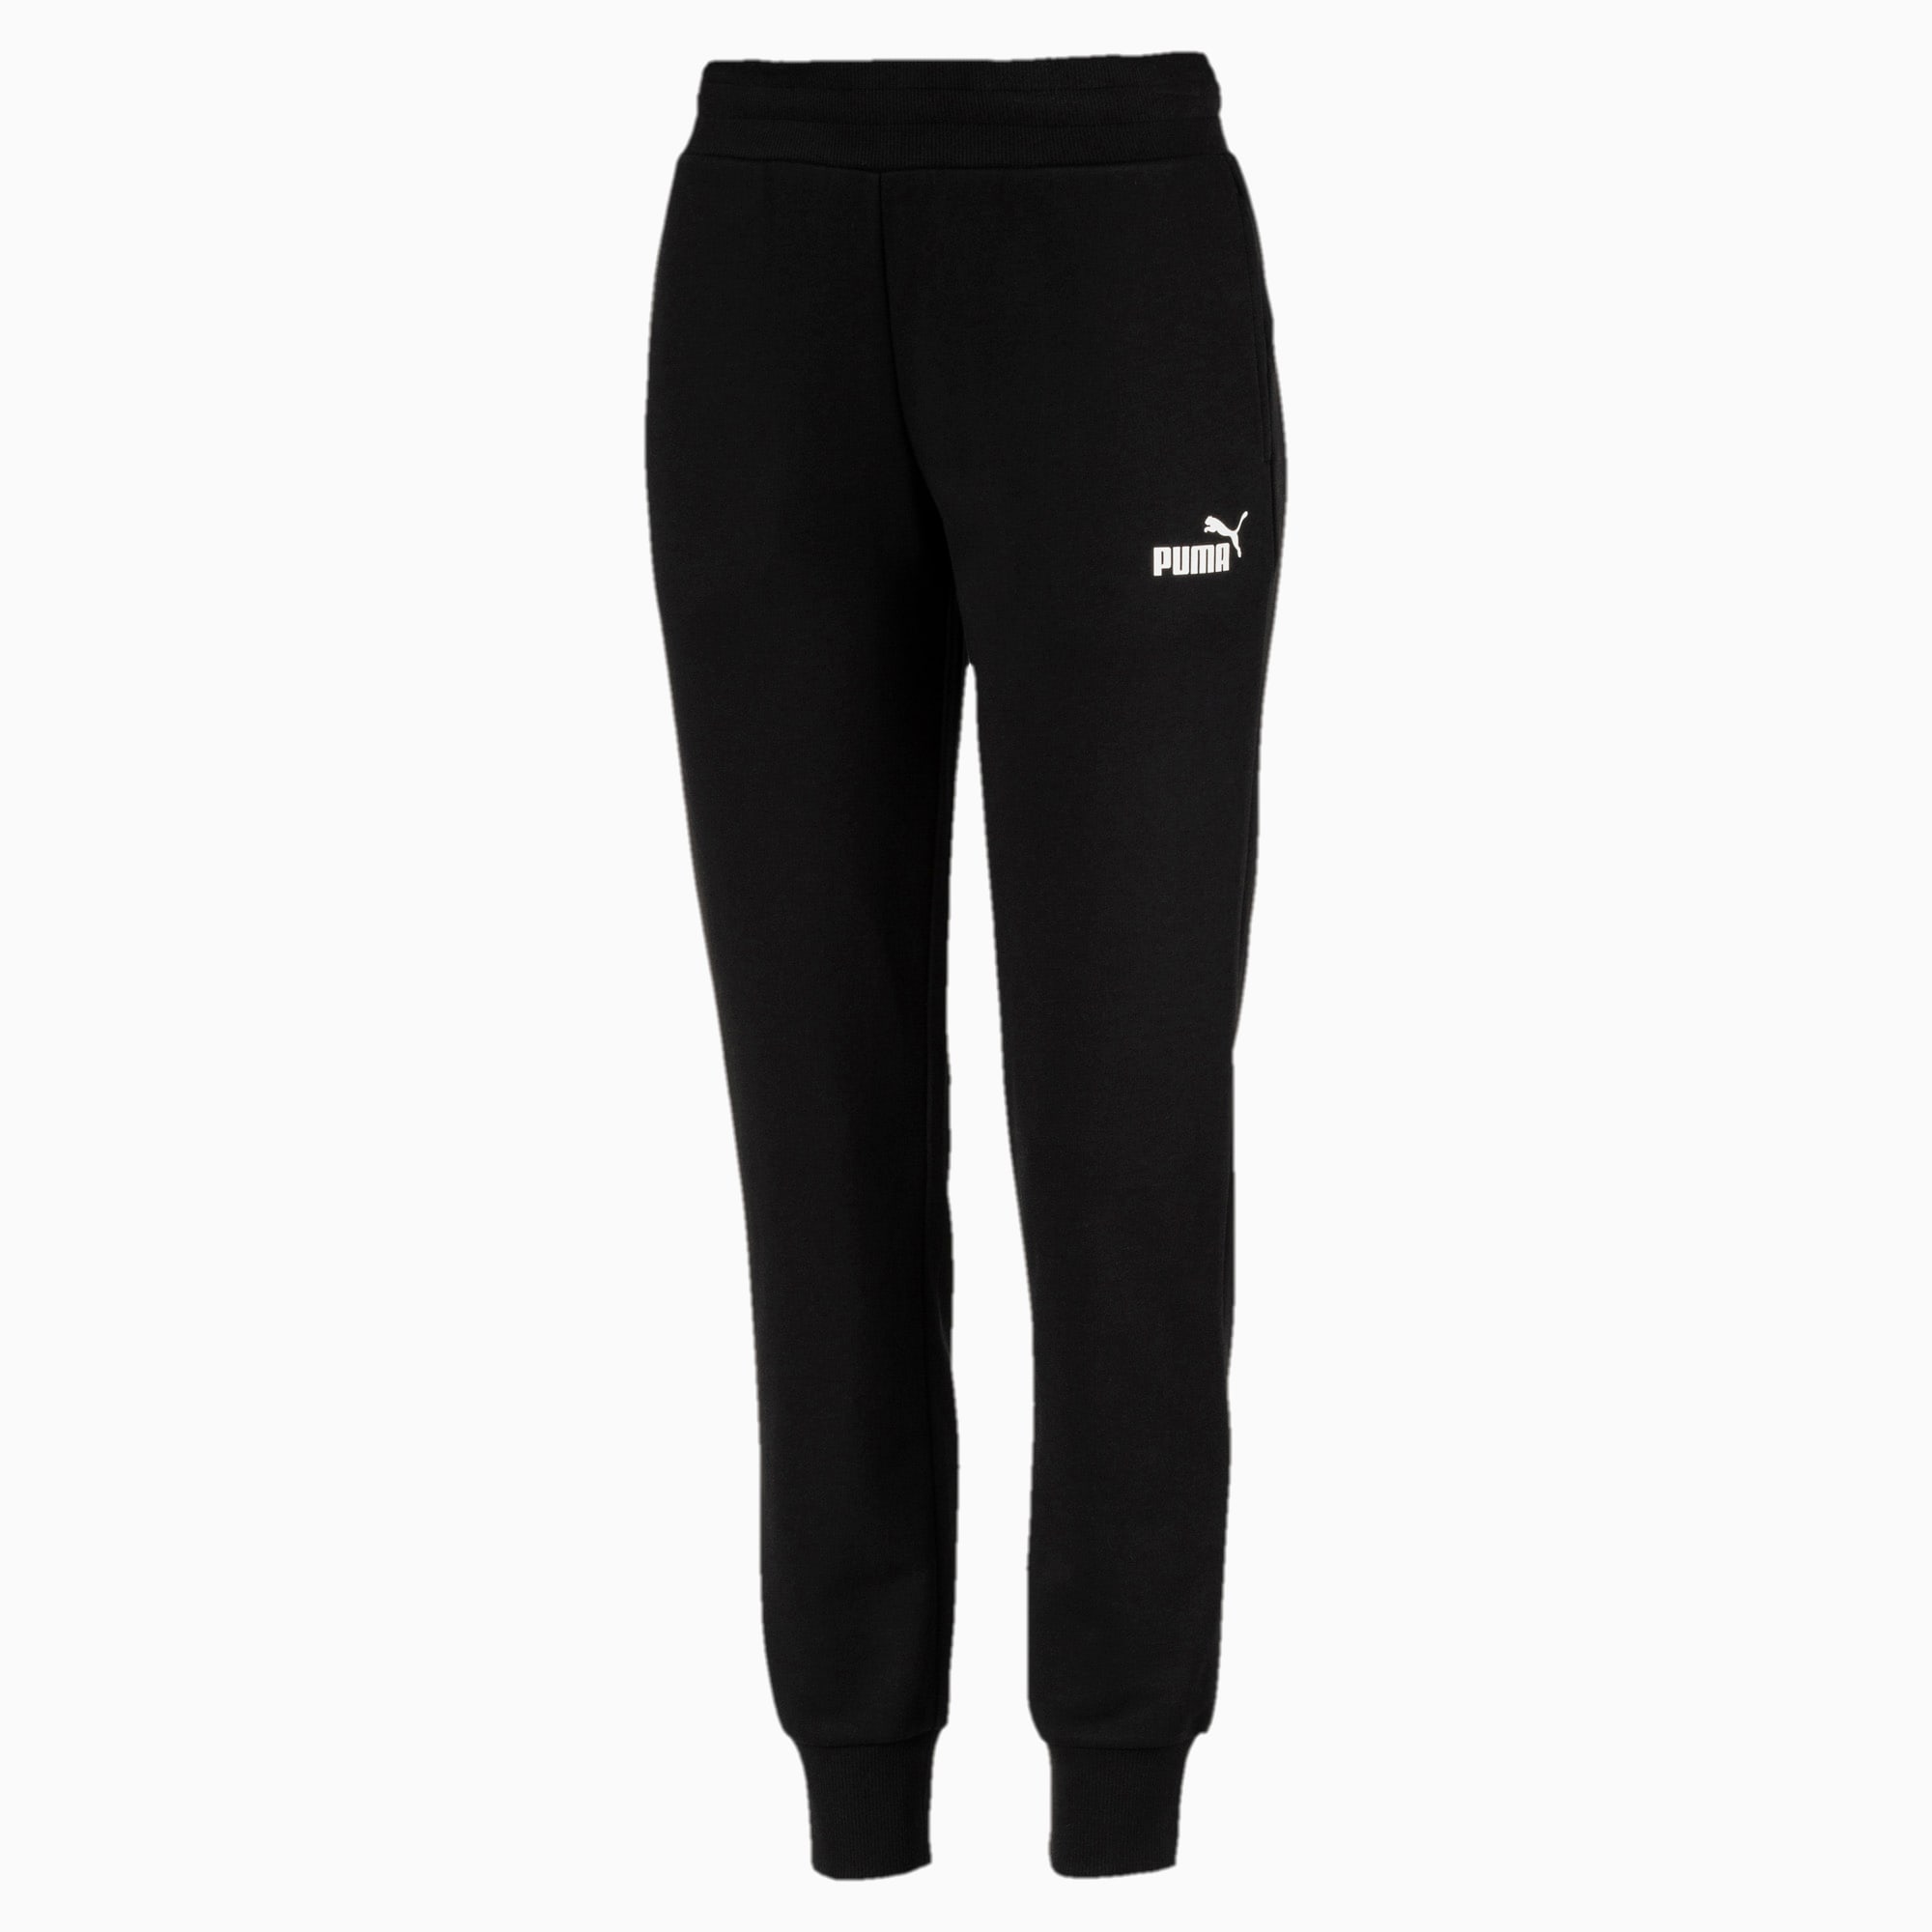 Essential Knitted Women's Sweatpants 